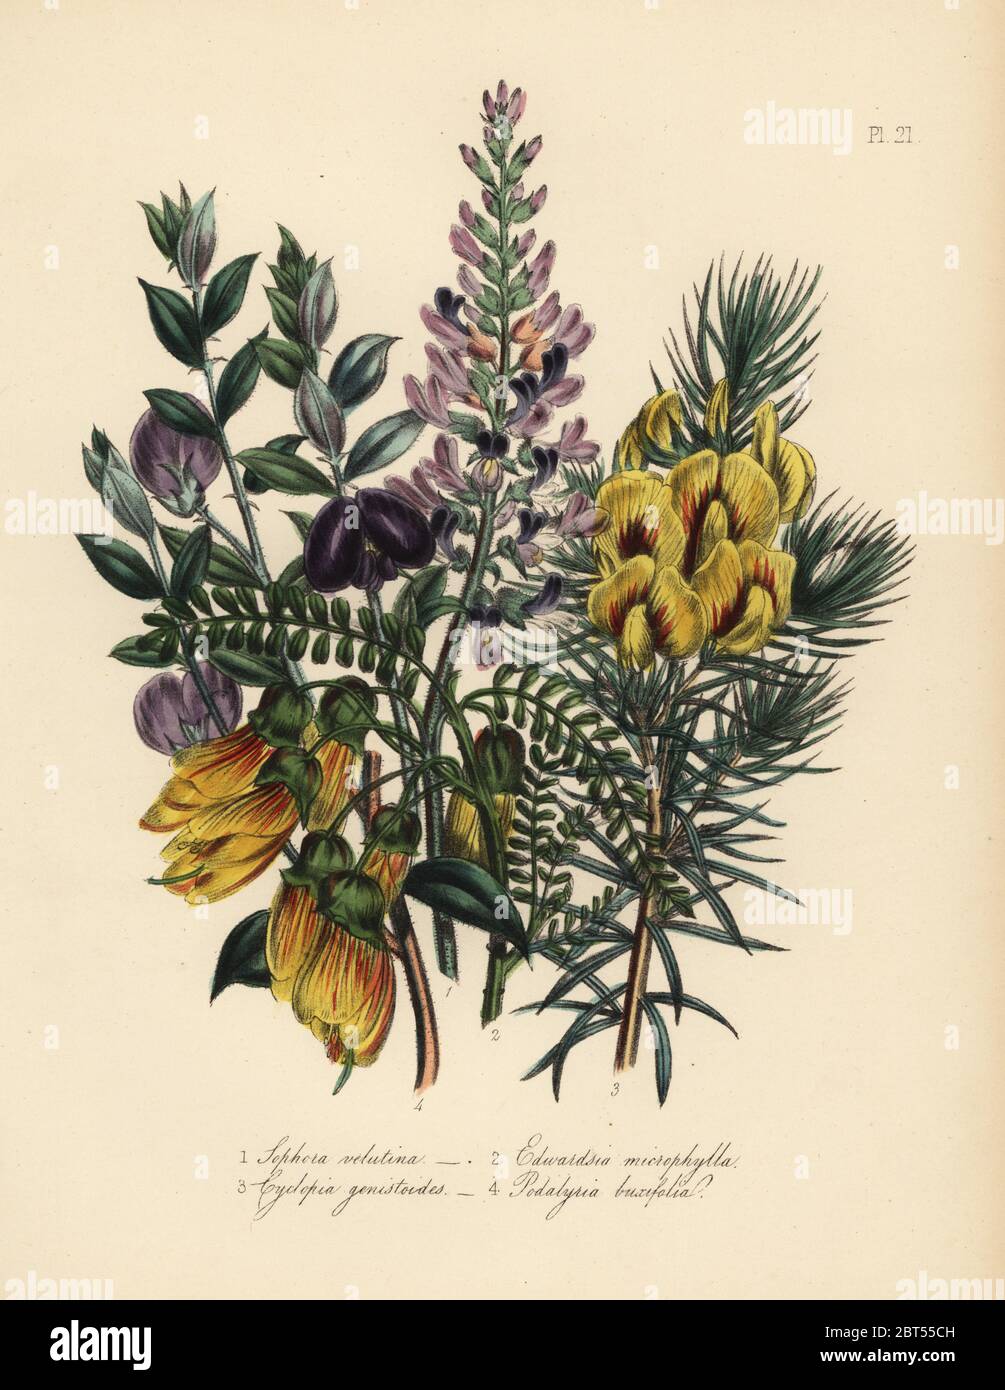 Velvet-leaved sophora, Sophora velutina, small-leaved edwardsia, Edwardsia microphylla, broom-like cyclopia, Cyclopia genistoides, and box-leaved podalyria, Podalyria buxifolia. Handfinished chromolithograph by Noel Humphreys after an illustration by Jane Loudon from Mrs. Jane Loudon's Ladies Flower Garden or Ornamental Greenhouse Plants, William S. Orr, London, 1849. Stock Photo